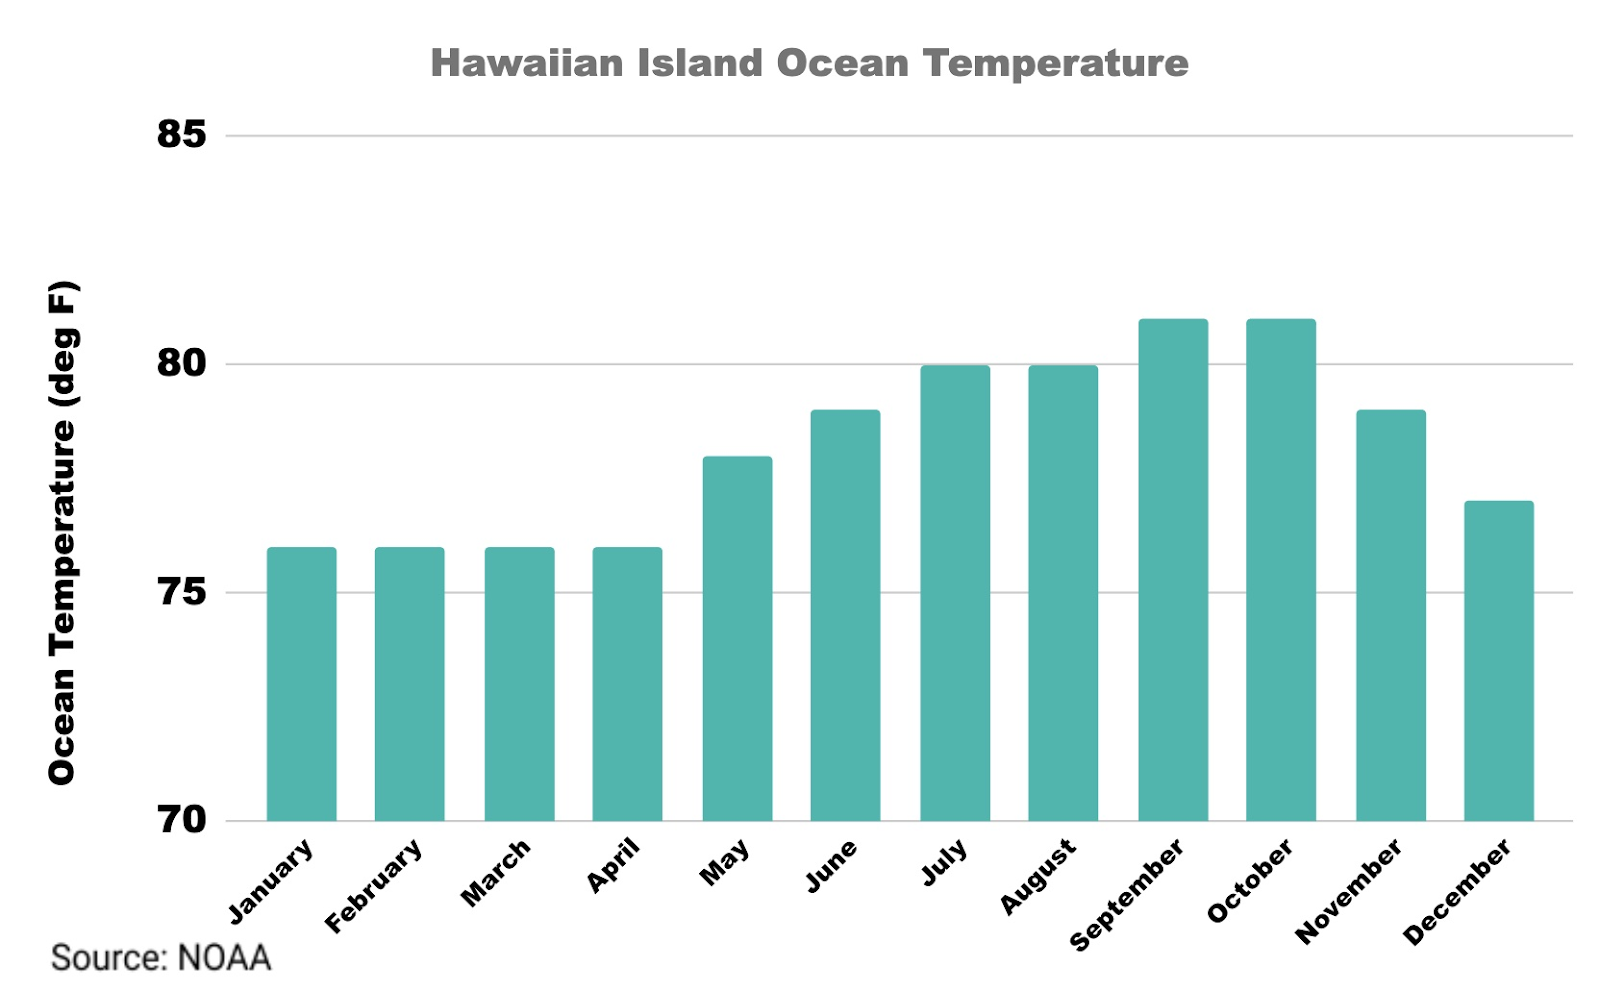 Graph depicting the ocean temperatures (Fahrenheit) surrounding the Hawaiian islands. Ocean temps are around 76 degrees January through April, reaching a high of about 81 in September and October.